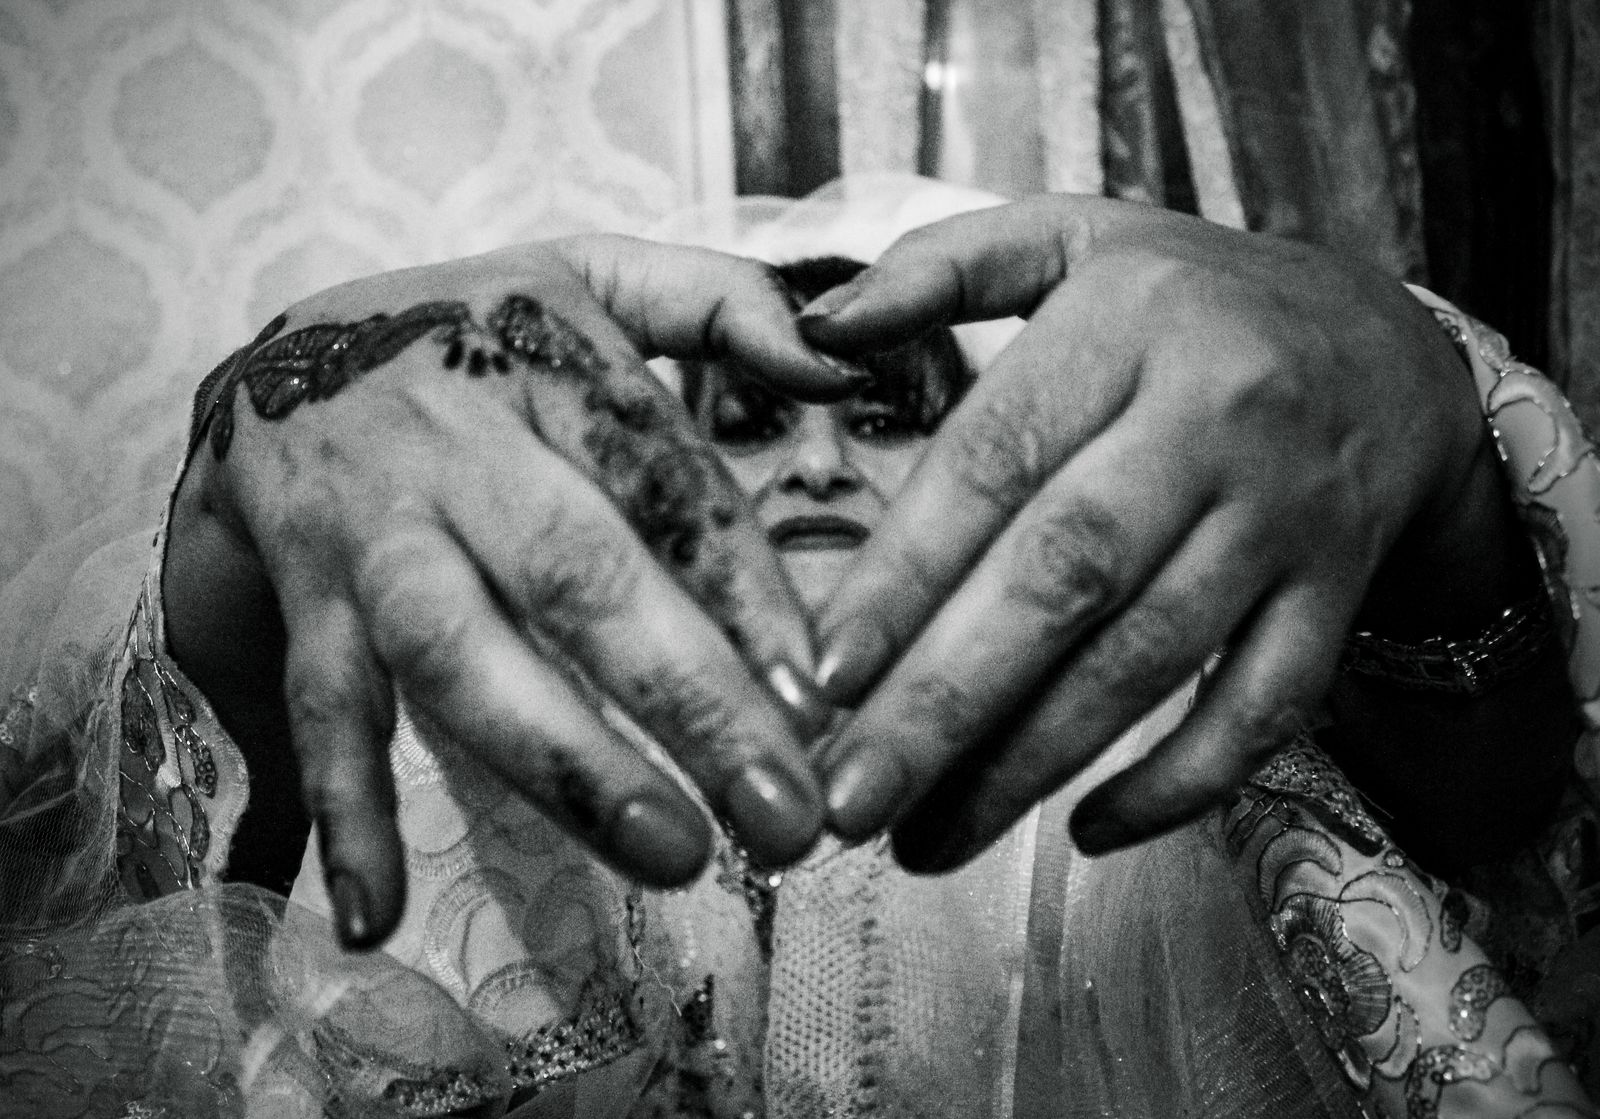 © Claudia Cuomo - Image from the Battle of algiers photography project